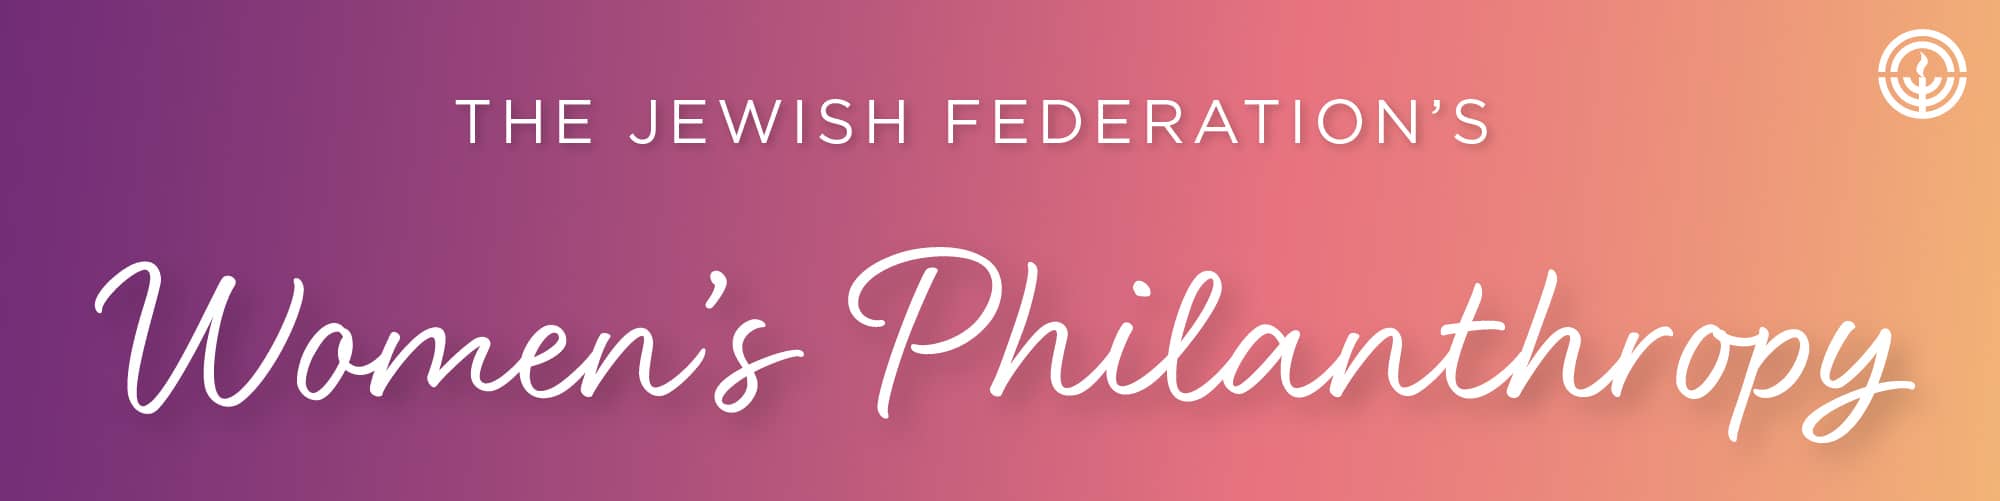 Banner with Purple, pink and orange gradient background reads: The Jewish Federation's Women's Philanthropy